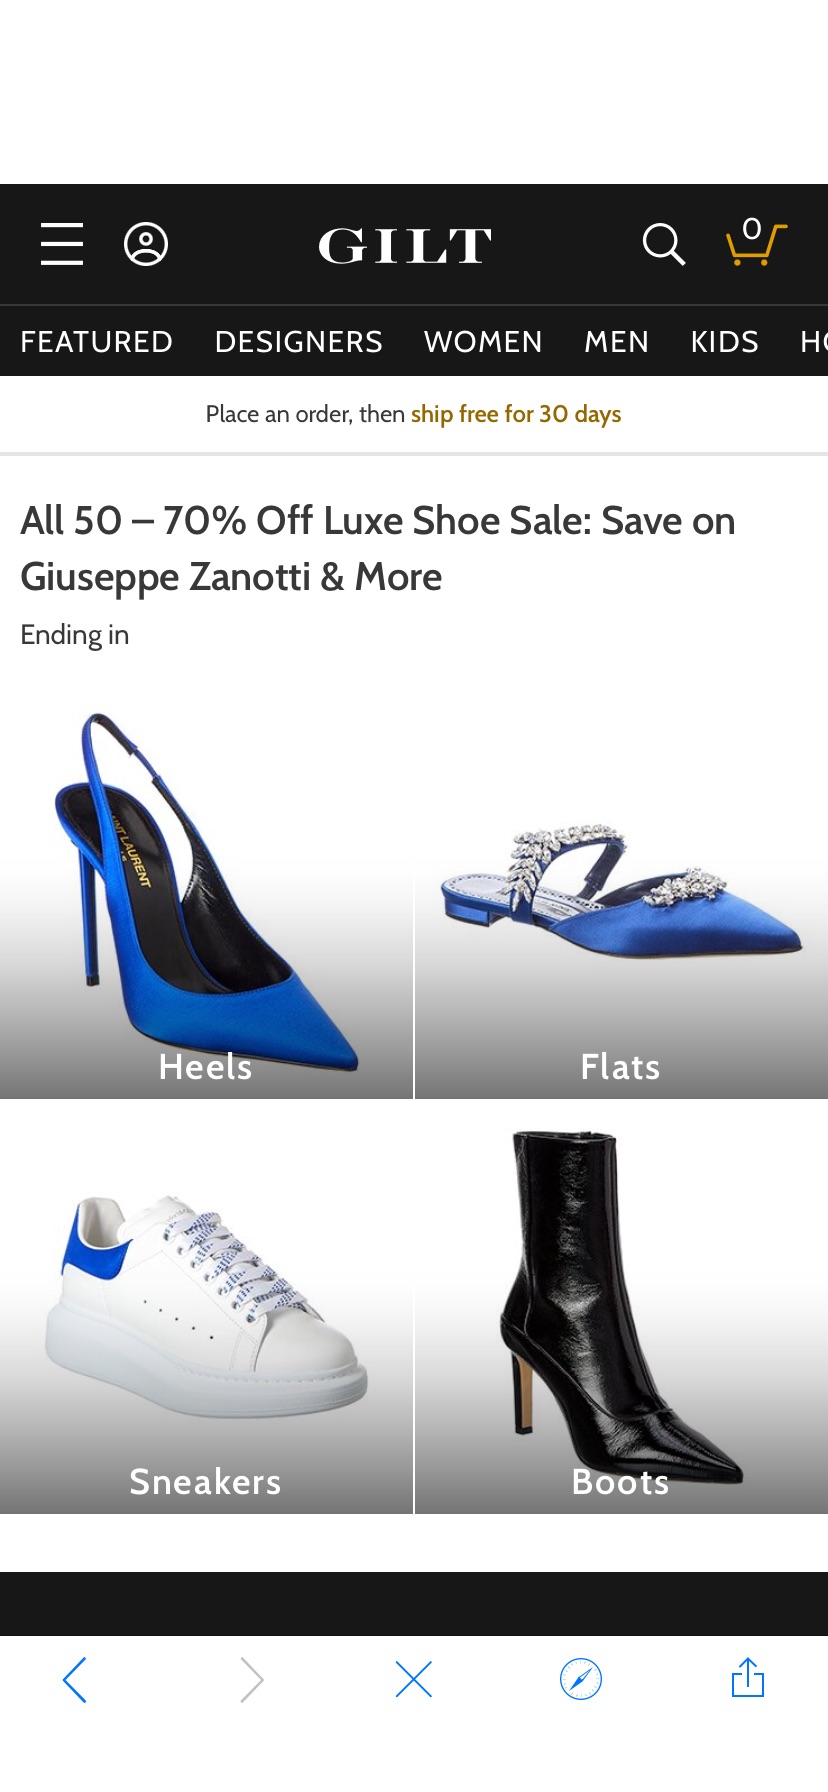 All 50 – 70% Off Luxe Shoe Sale: Save on Giuseppe Zanotti & More / Gilt